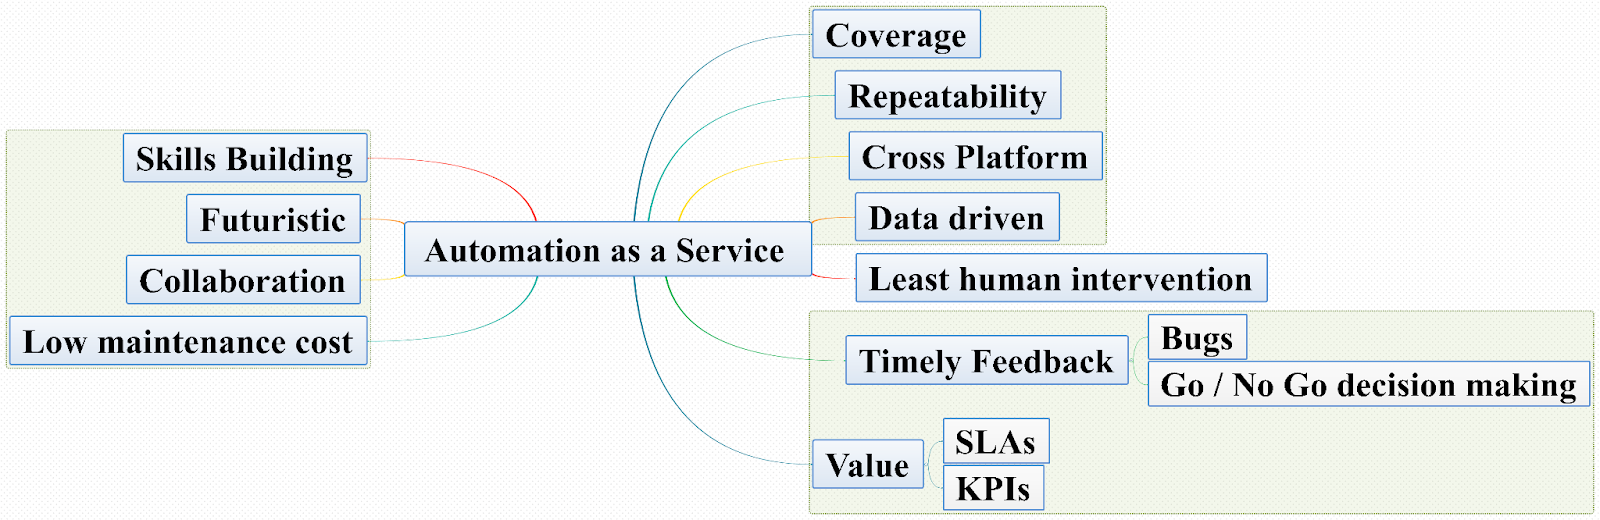 Automation as a service